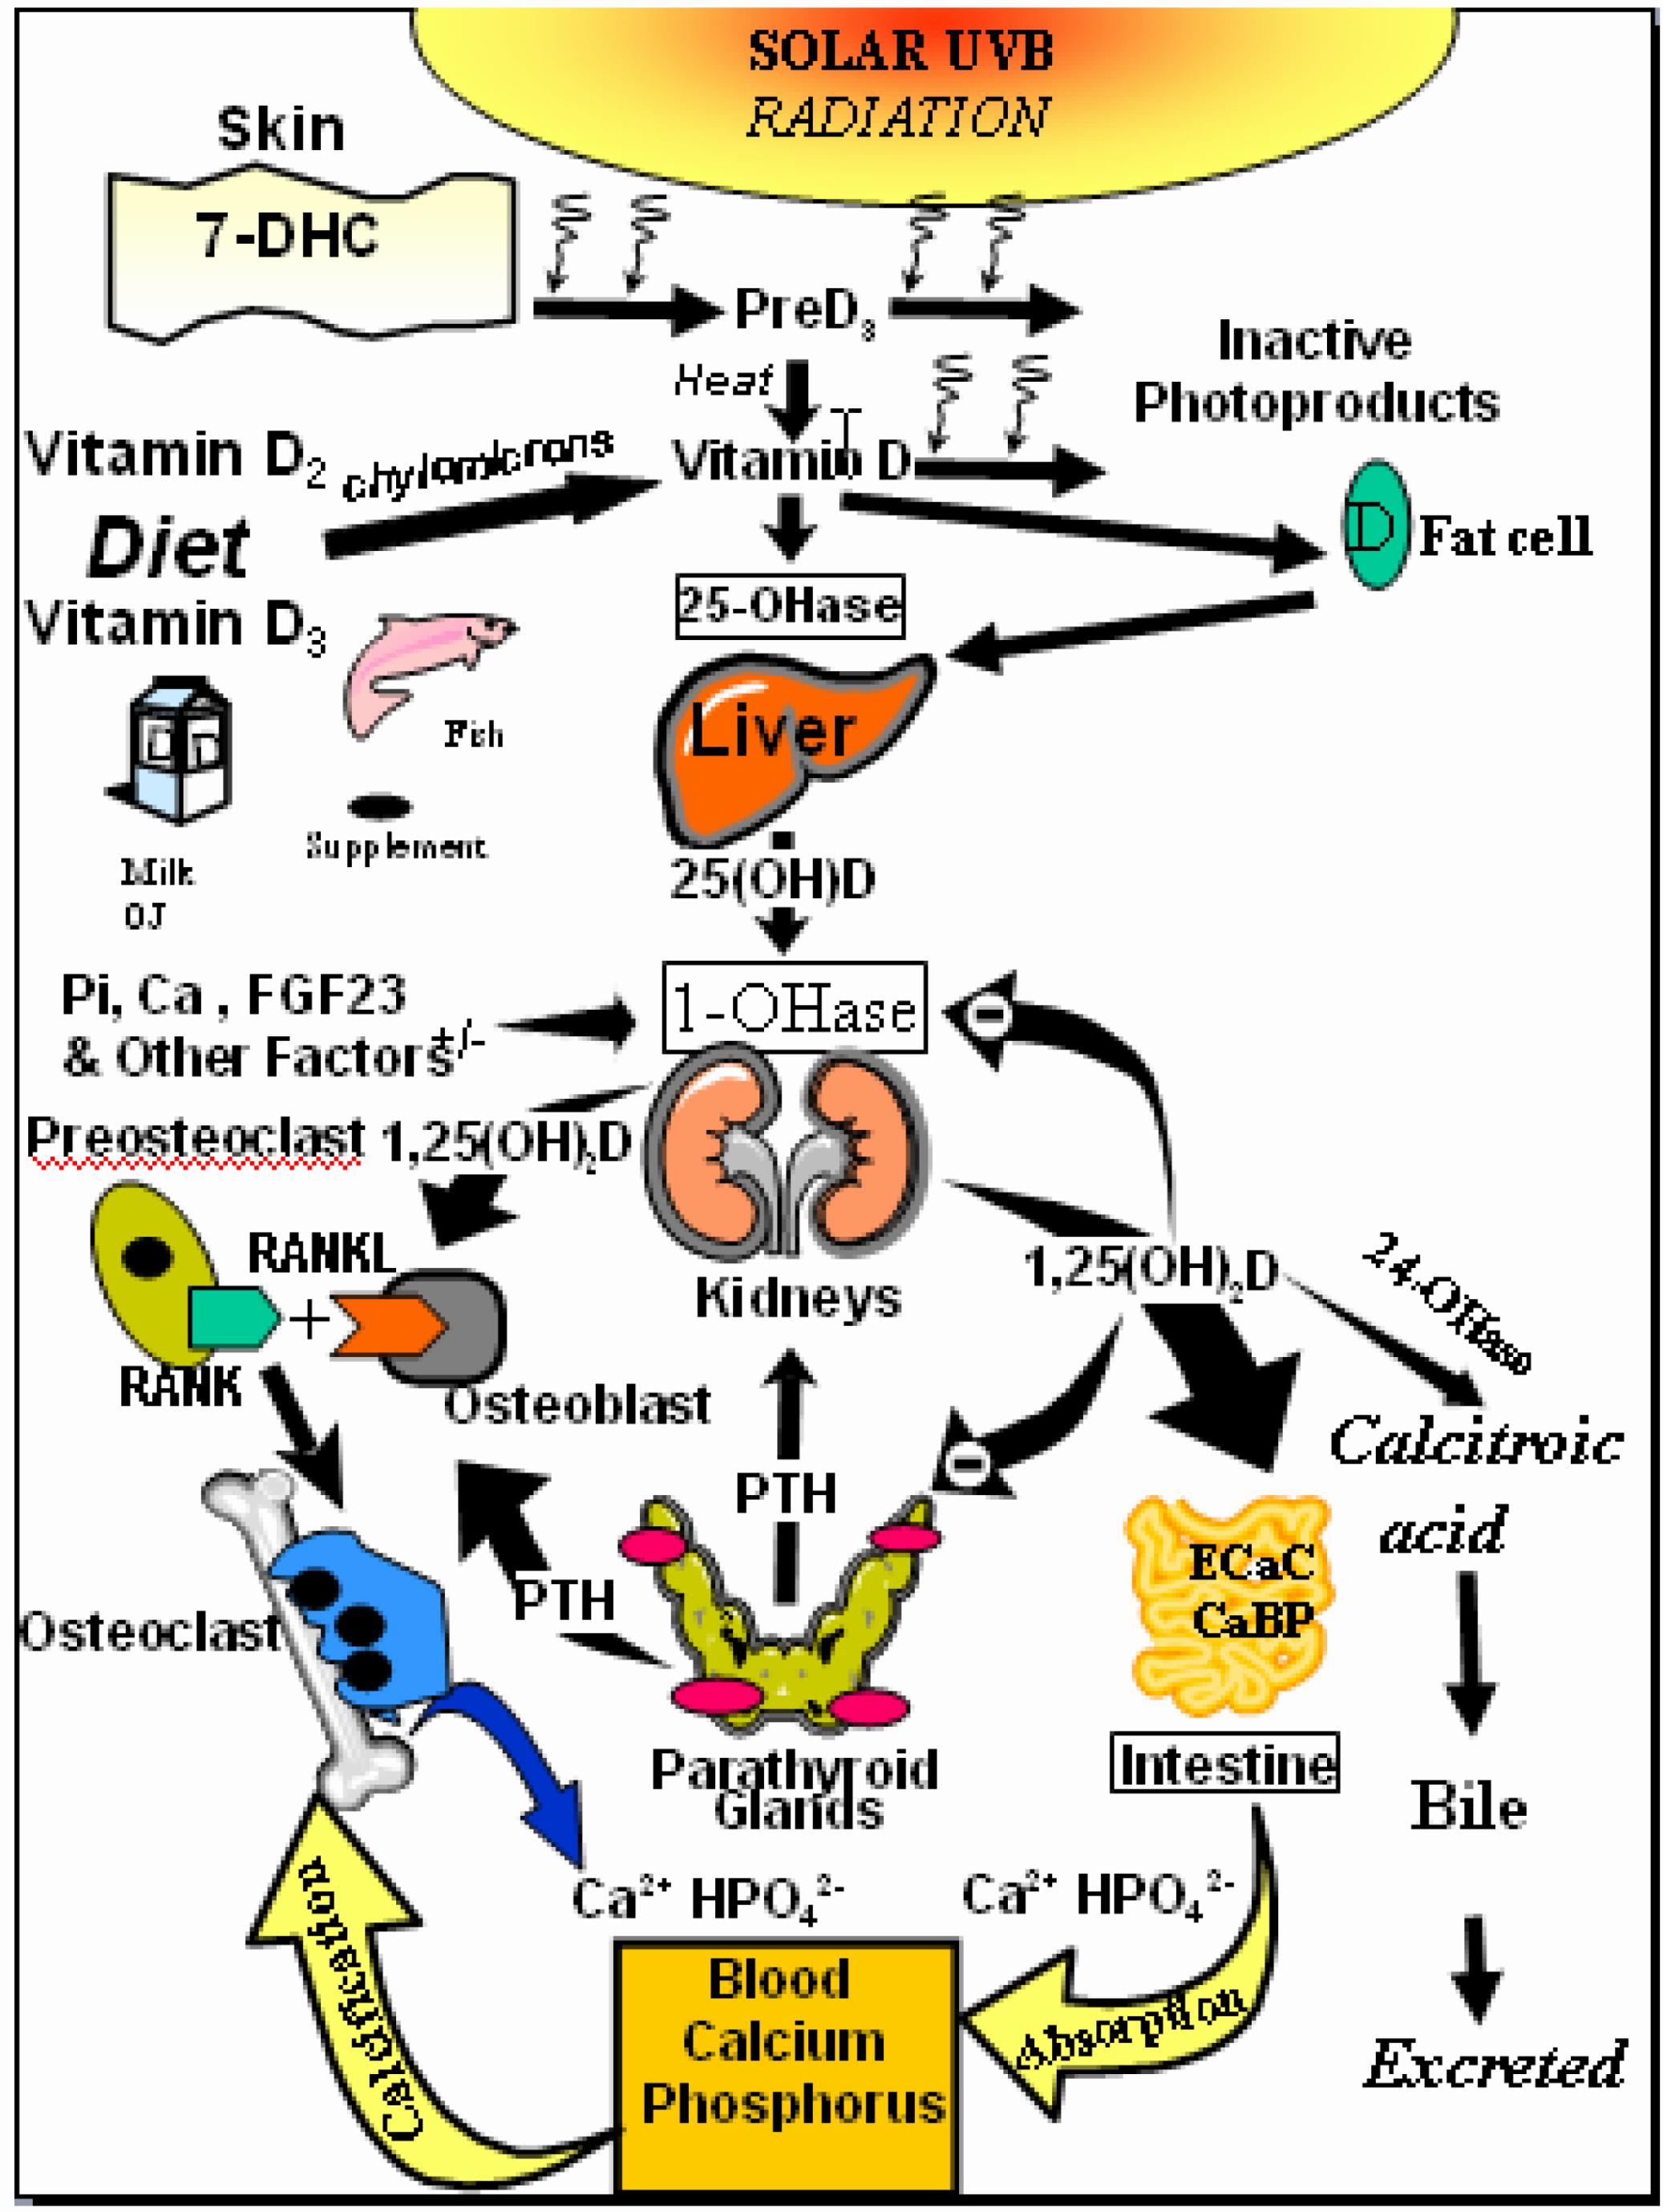 This image shows the metabolism of vitamin D and its effects on calcium and phosphate homeostasis.